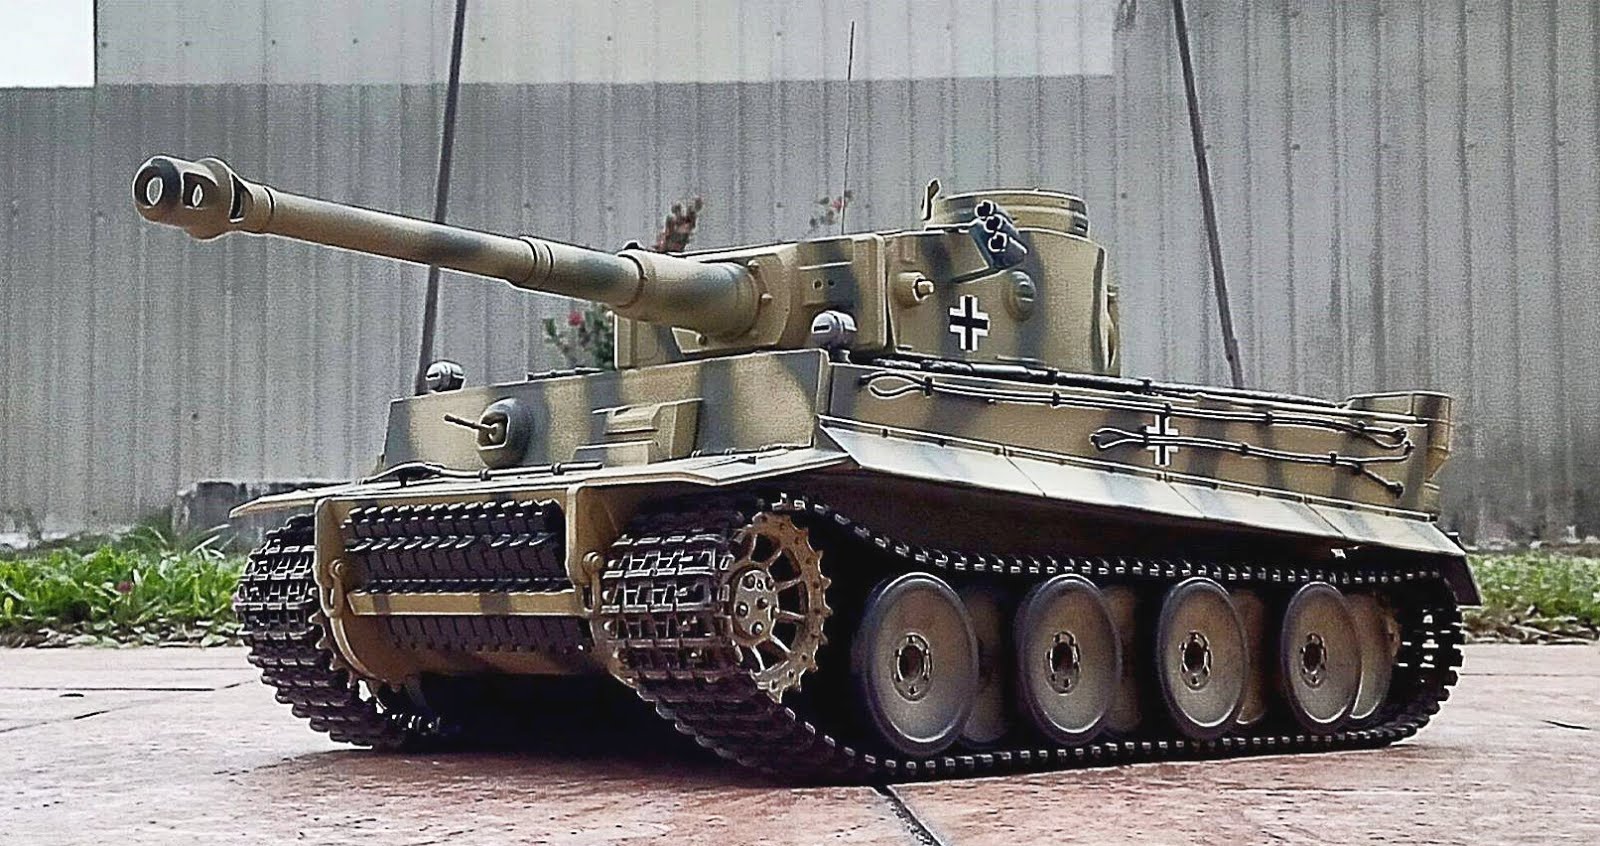 Another Kursk Tiger I